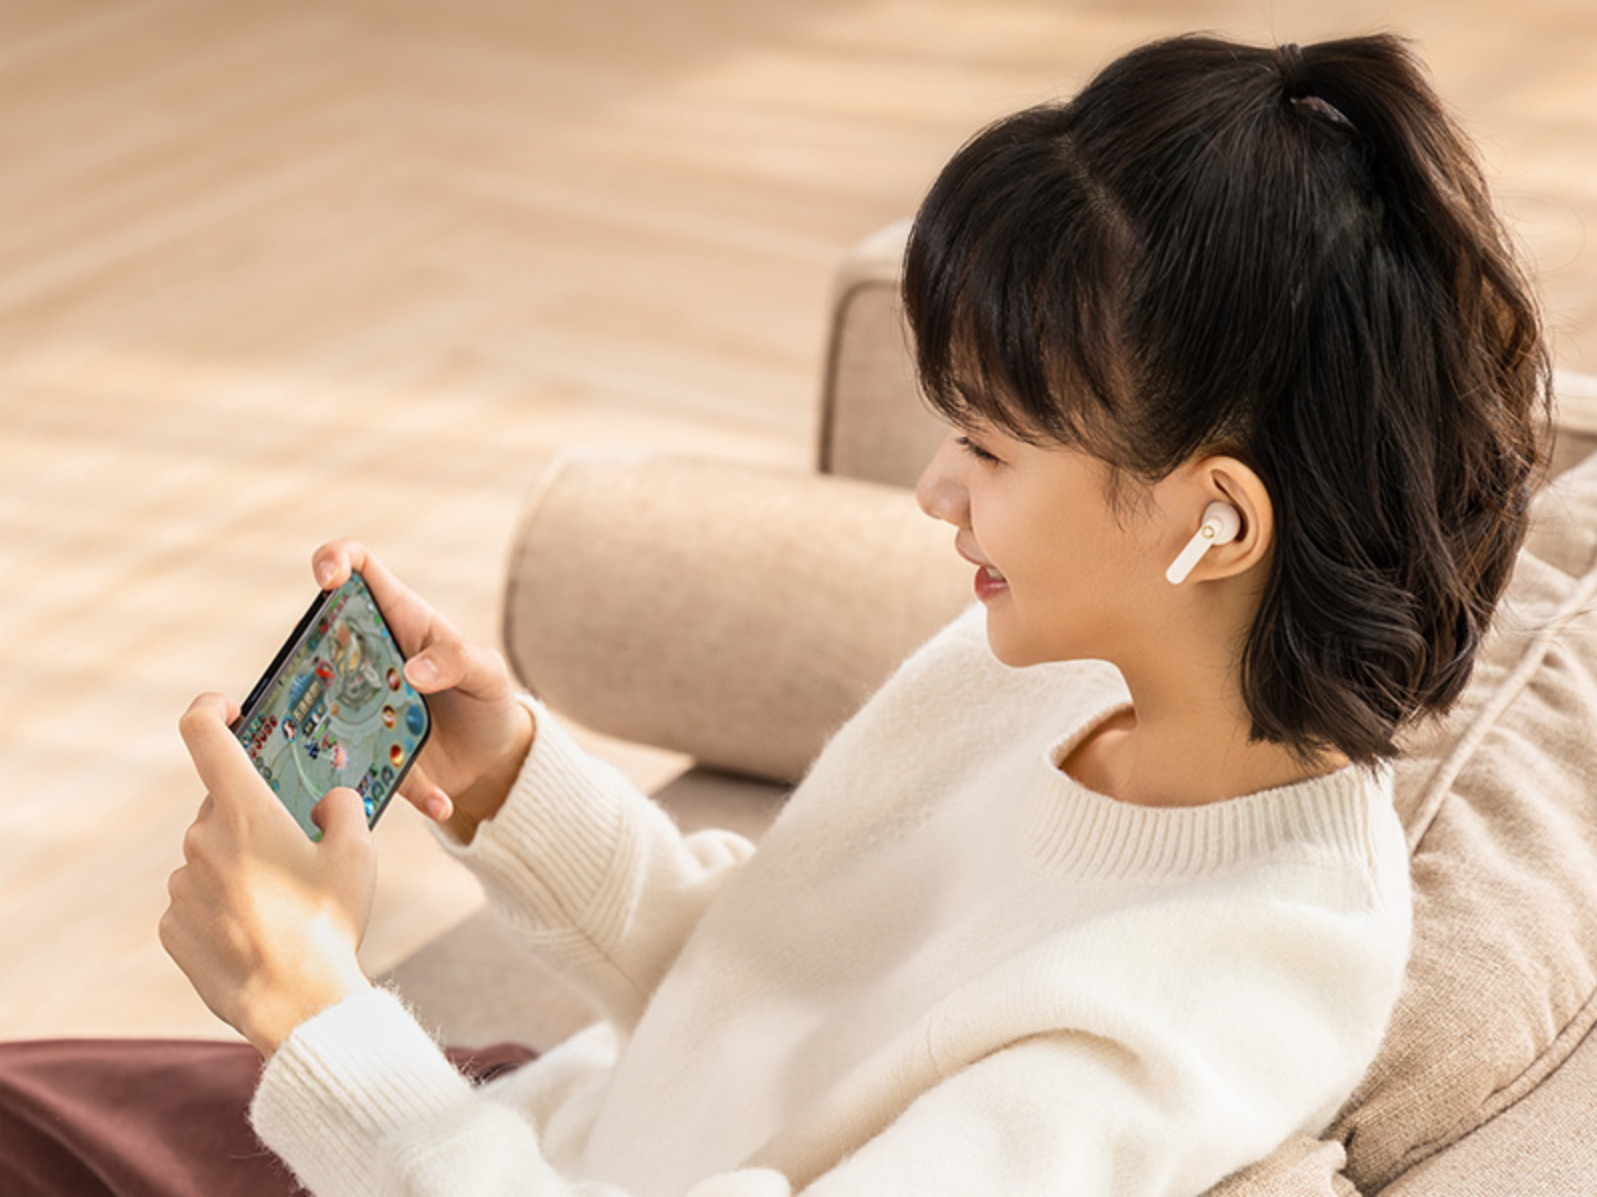 A girl playing game with EDIFIER TO-U2 mini earbuds